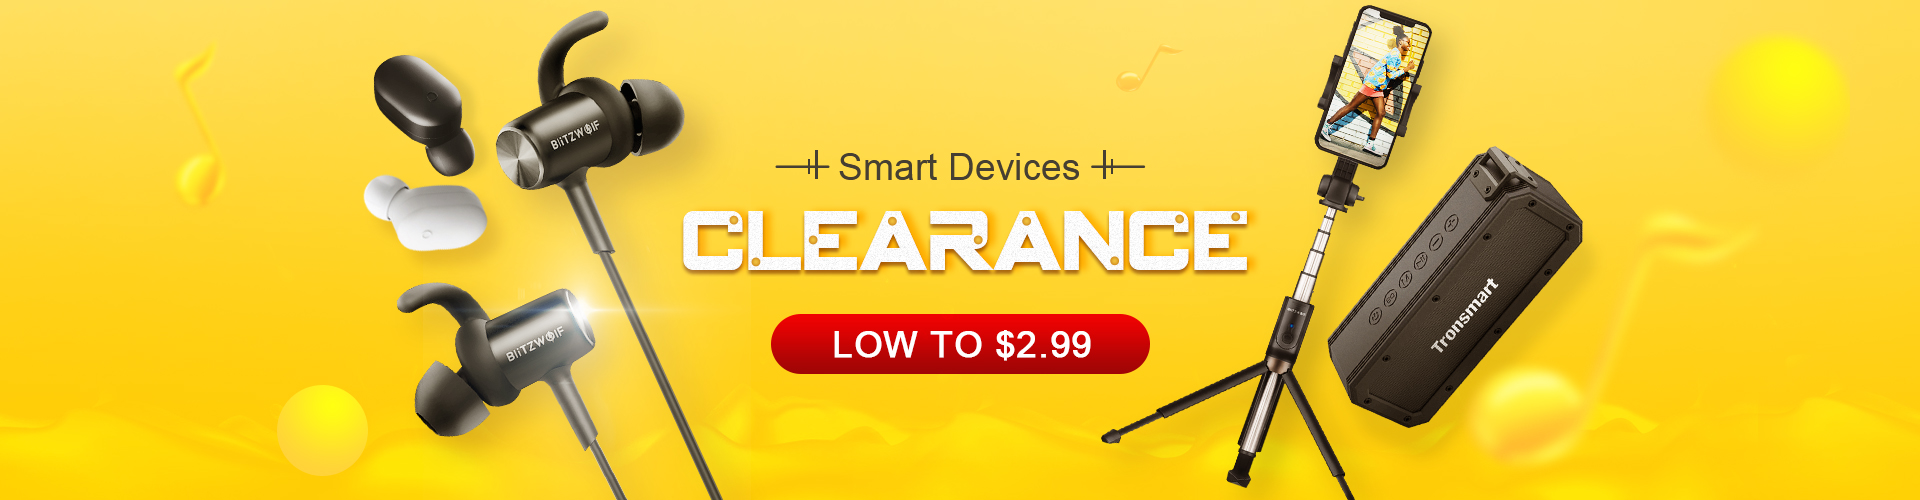 Smart Devices Clearance